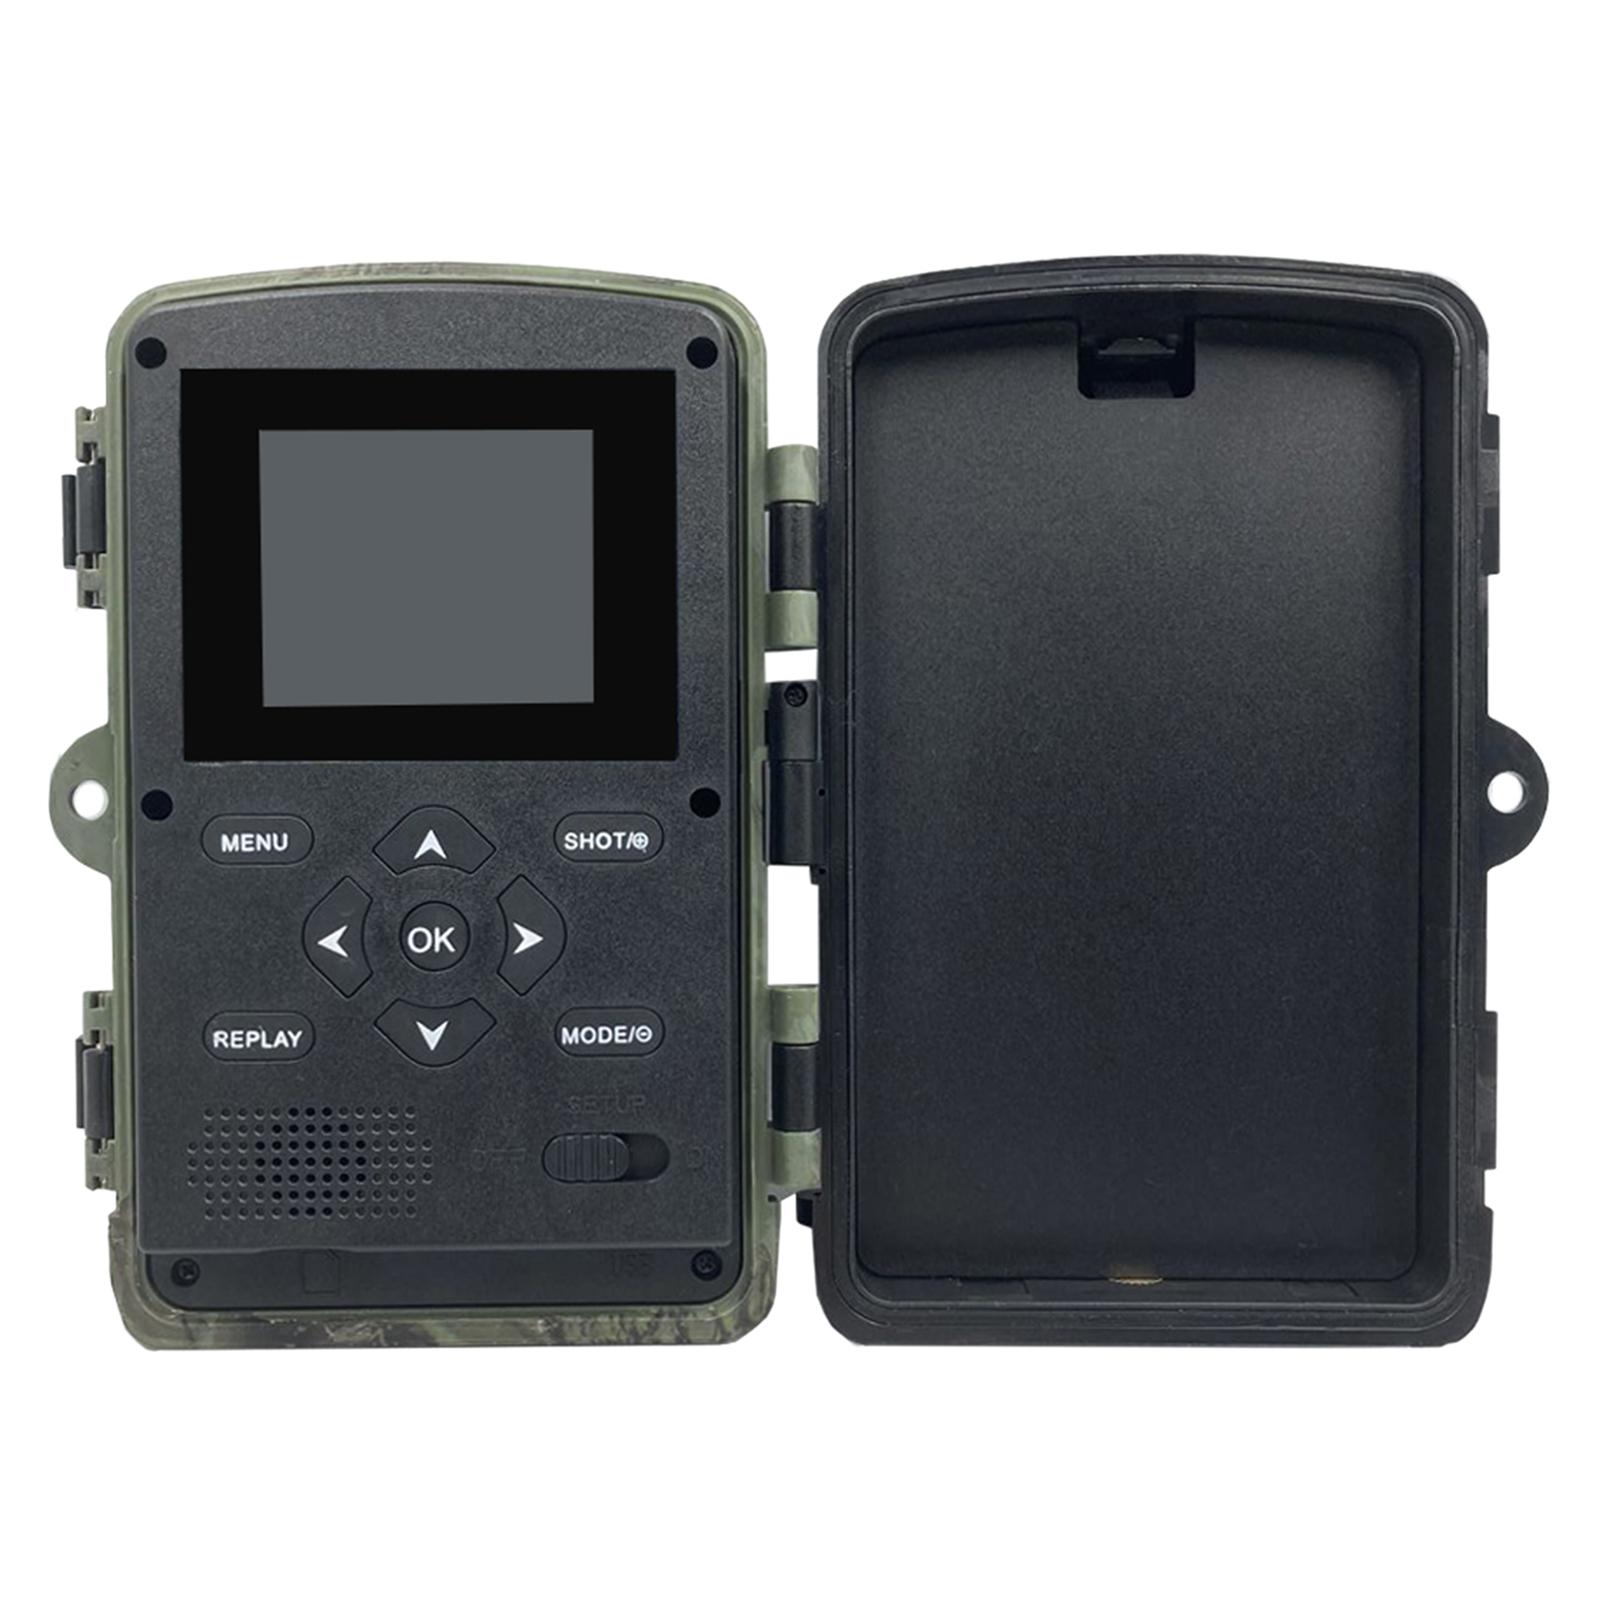 Trail Camera 16MP 1080P FHD 120 degreeWide Camera Lens 2.0'' LCD Wildlife Camera - image 2 of 8